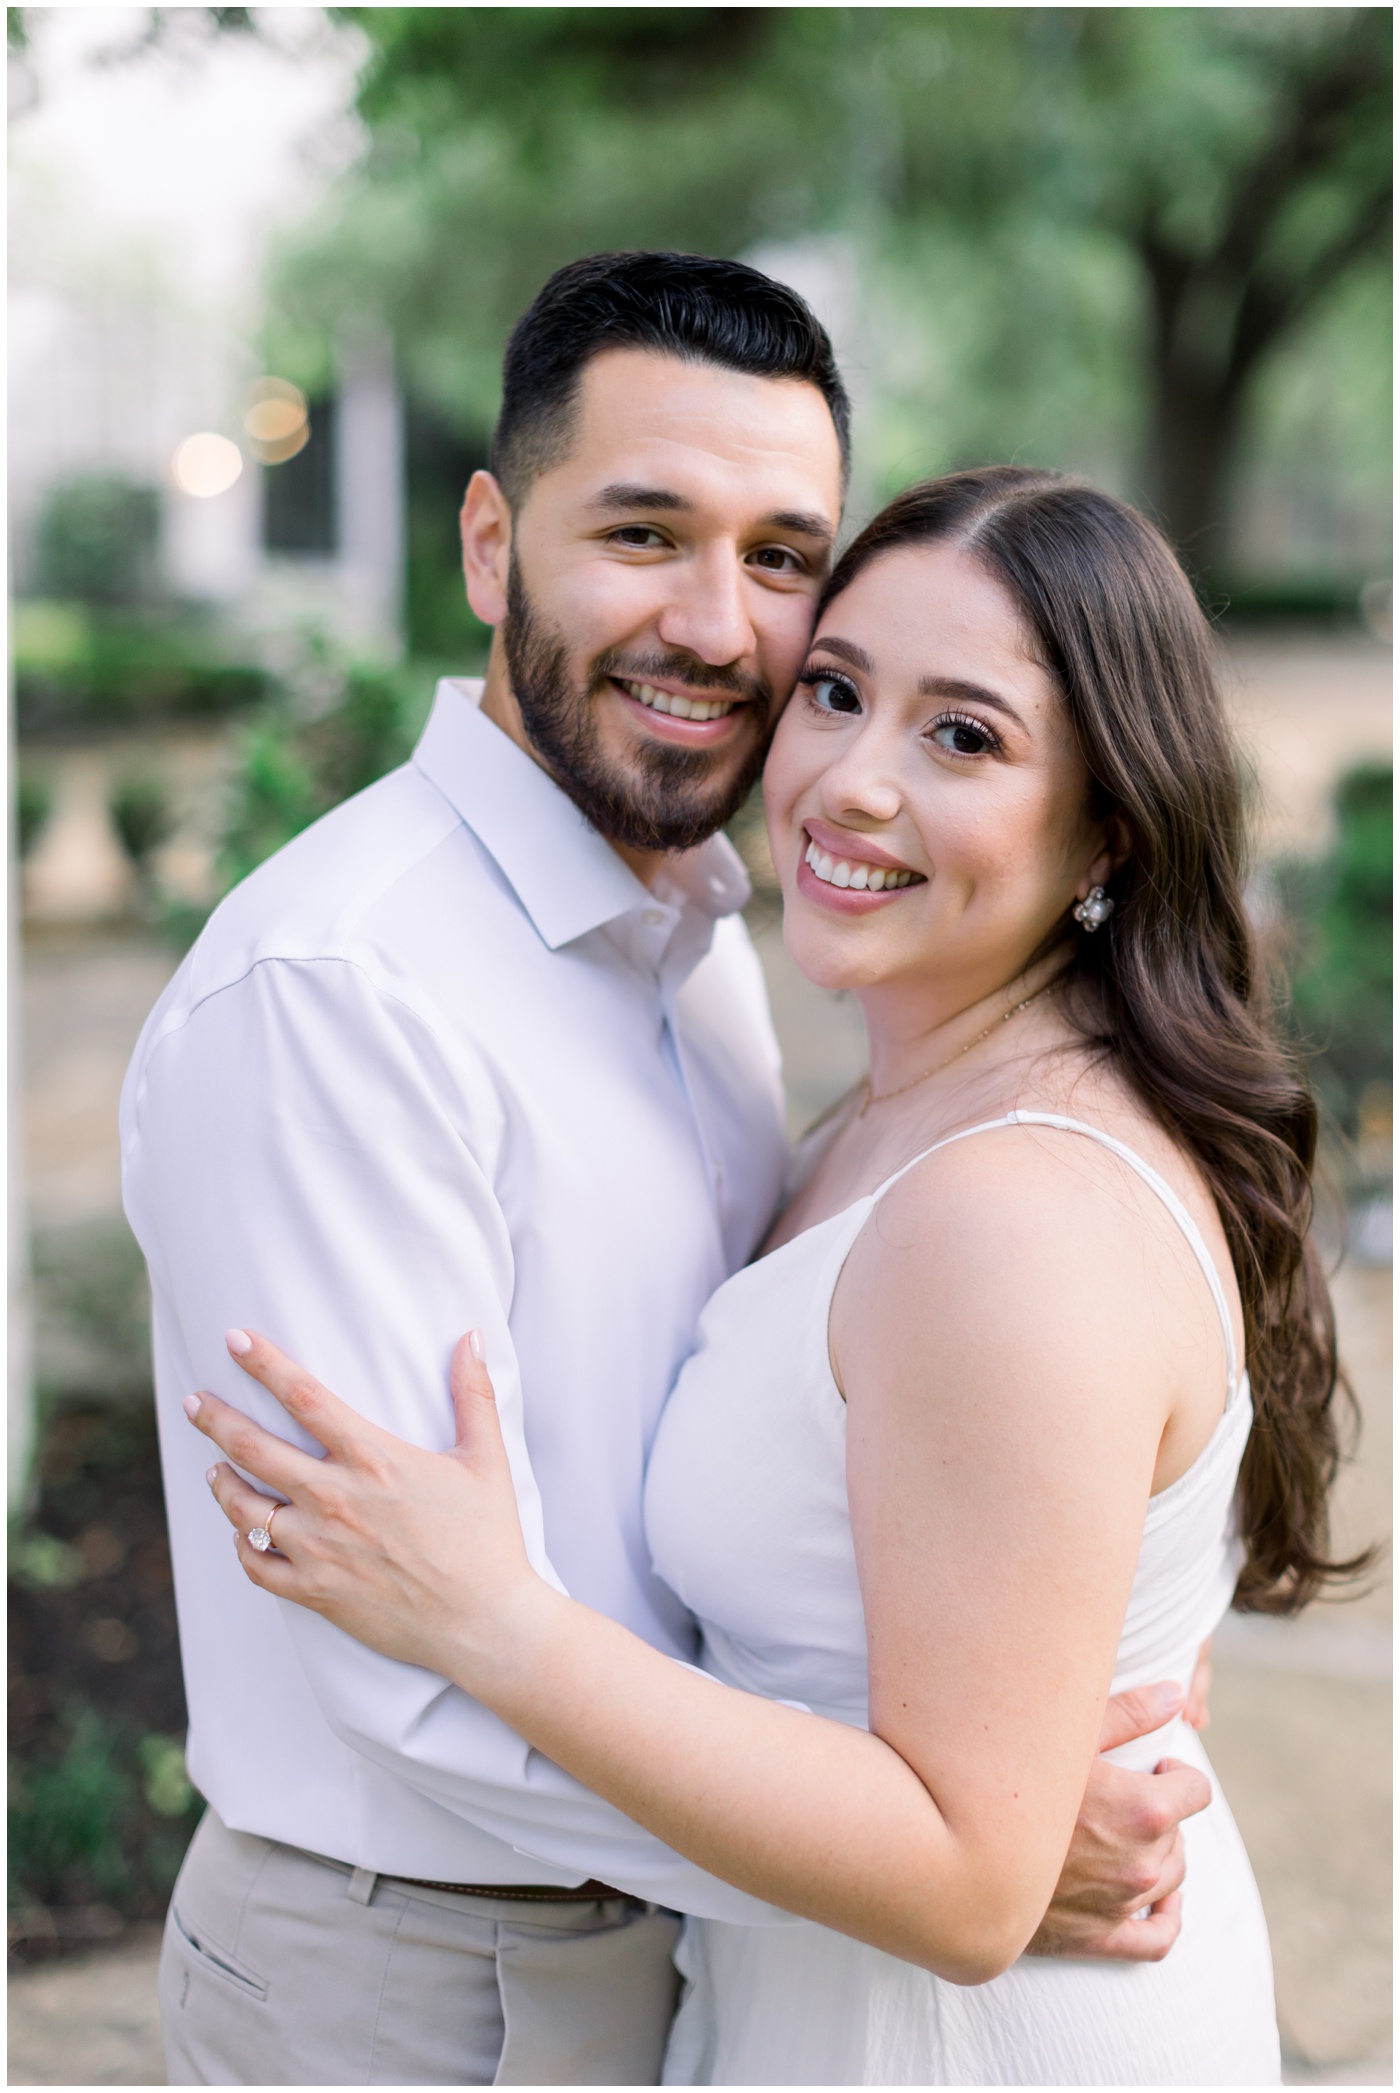 A couple smiles together during their Houston engagement session at the Peach Orchard Venue